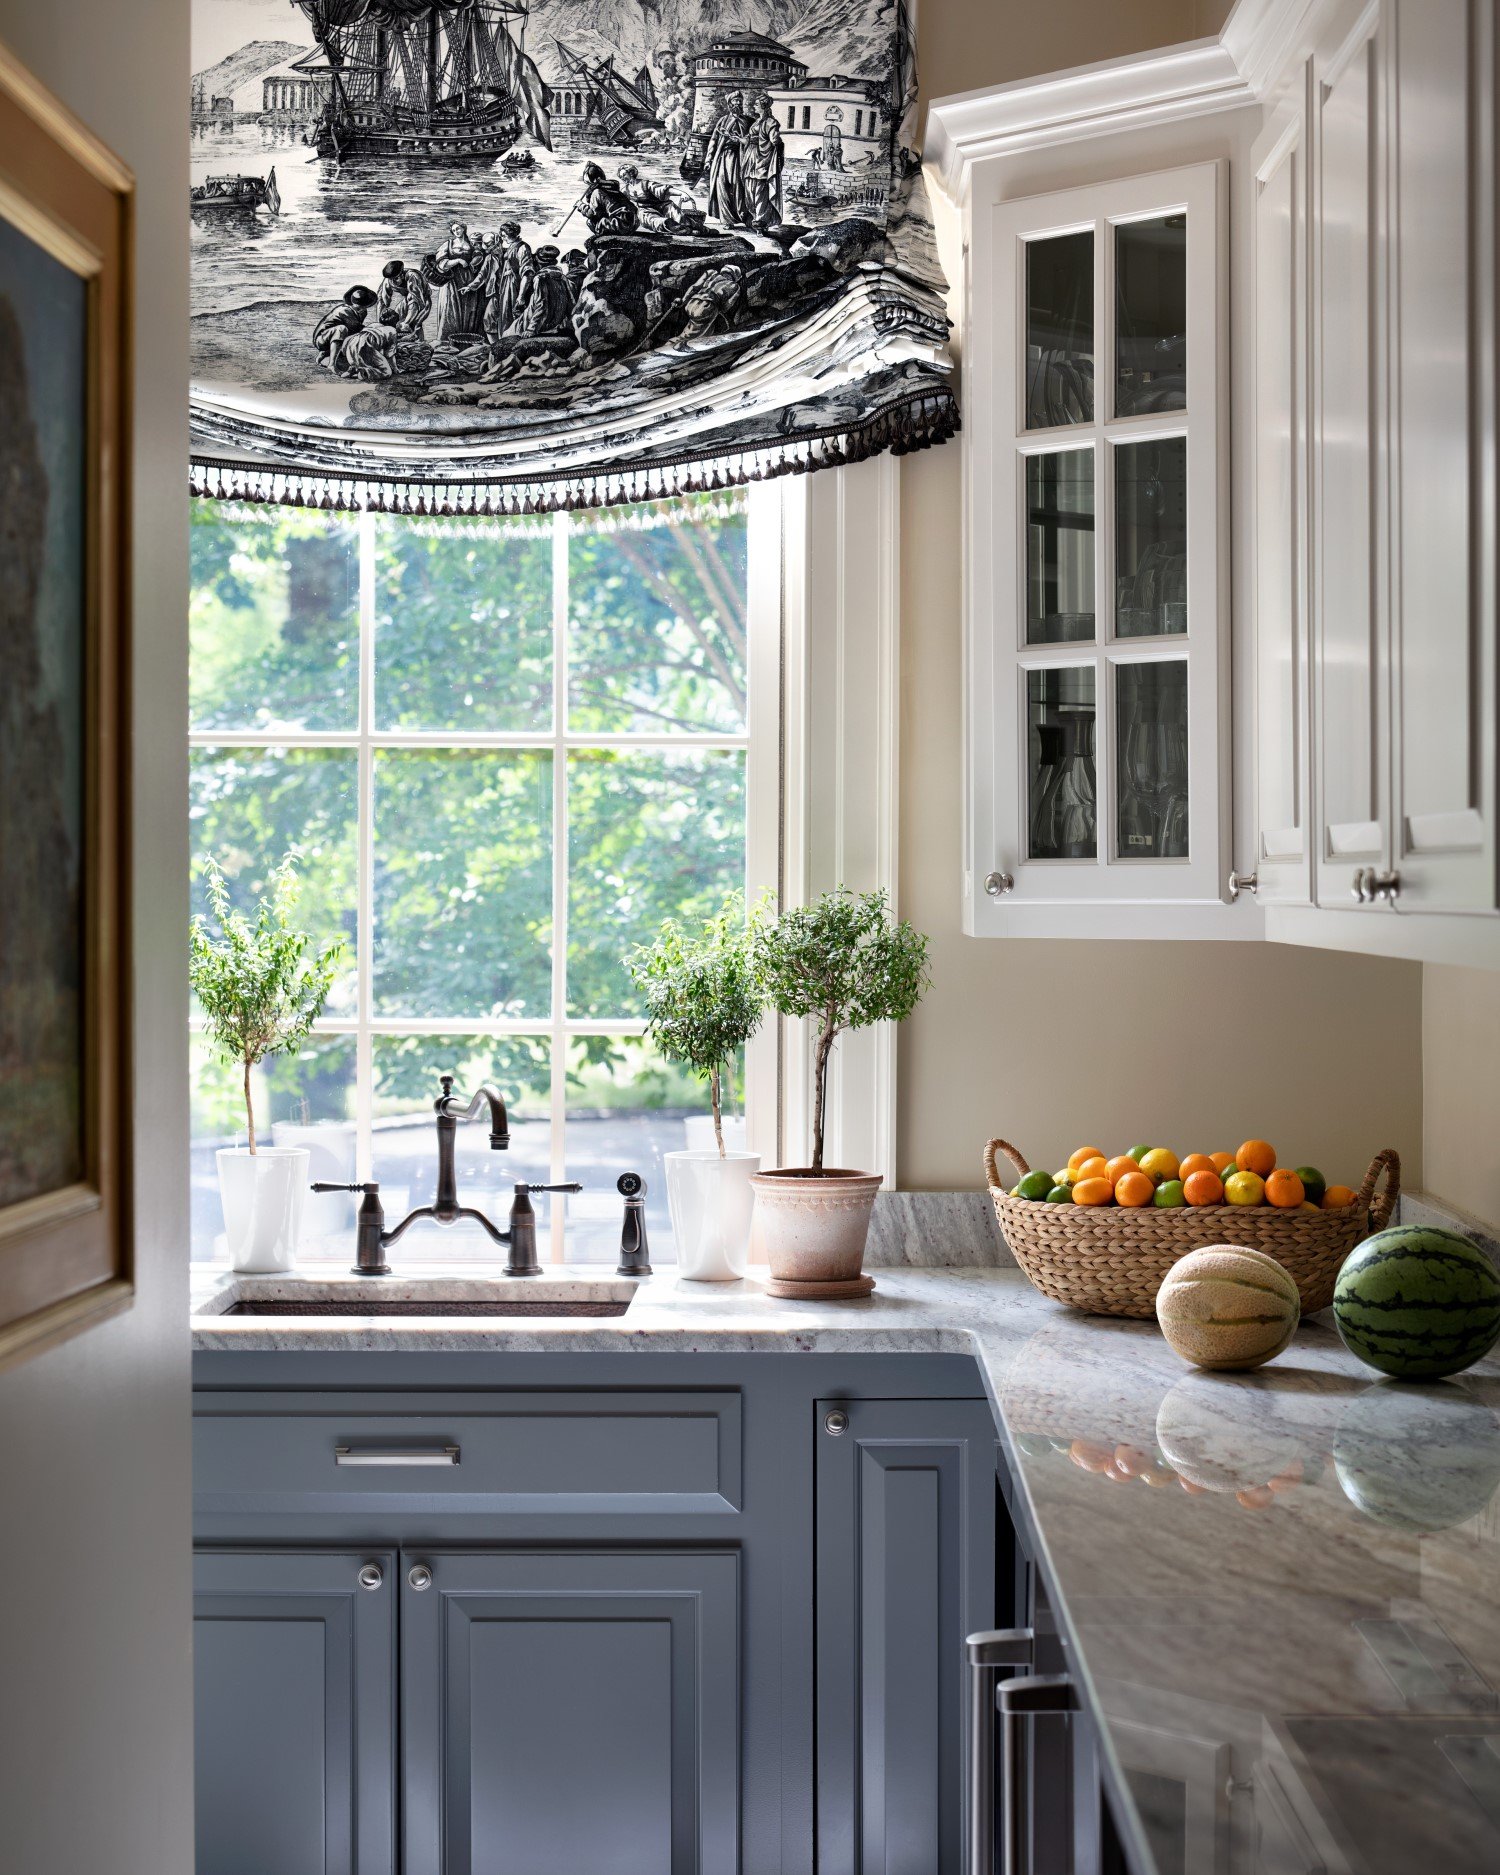  Kitchen vignette by Bridget Beari Designs with classical details in the French blue and white cabinetry and a sophisticate flounced roman shade in a black marine toile 